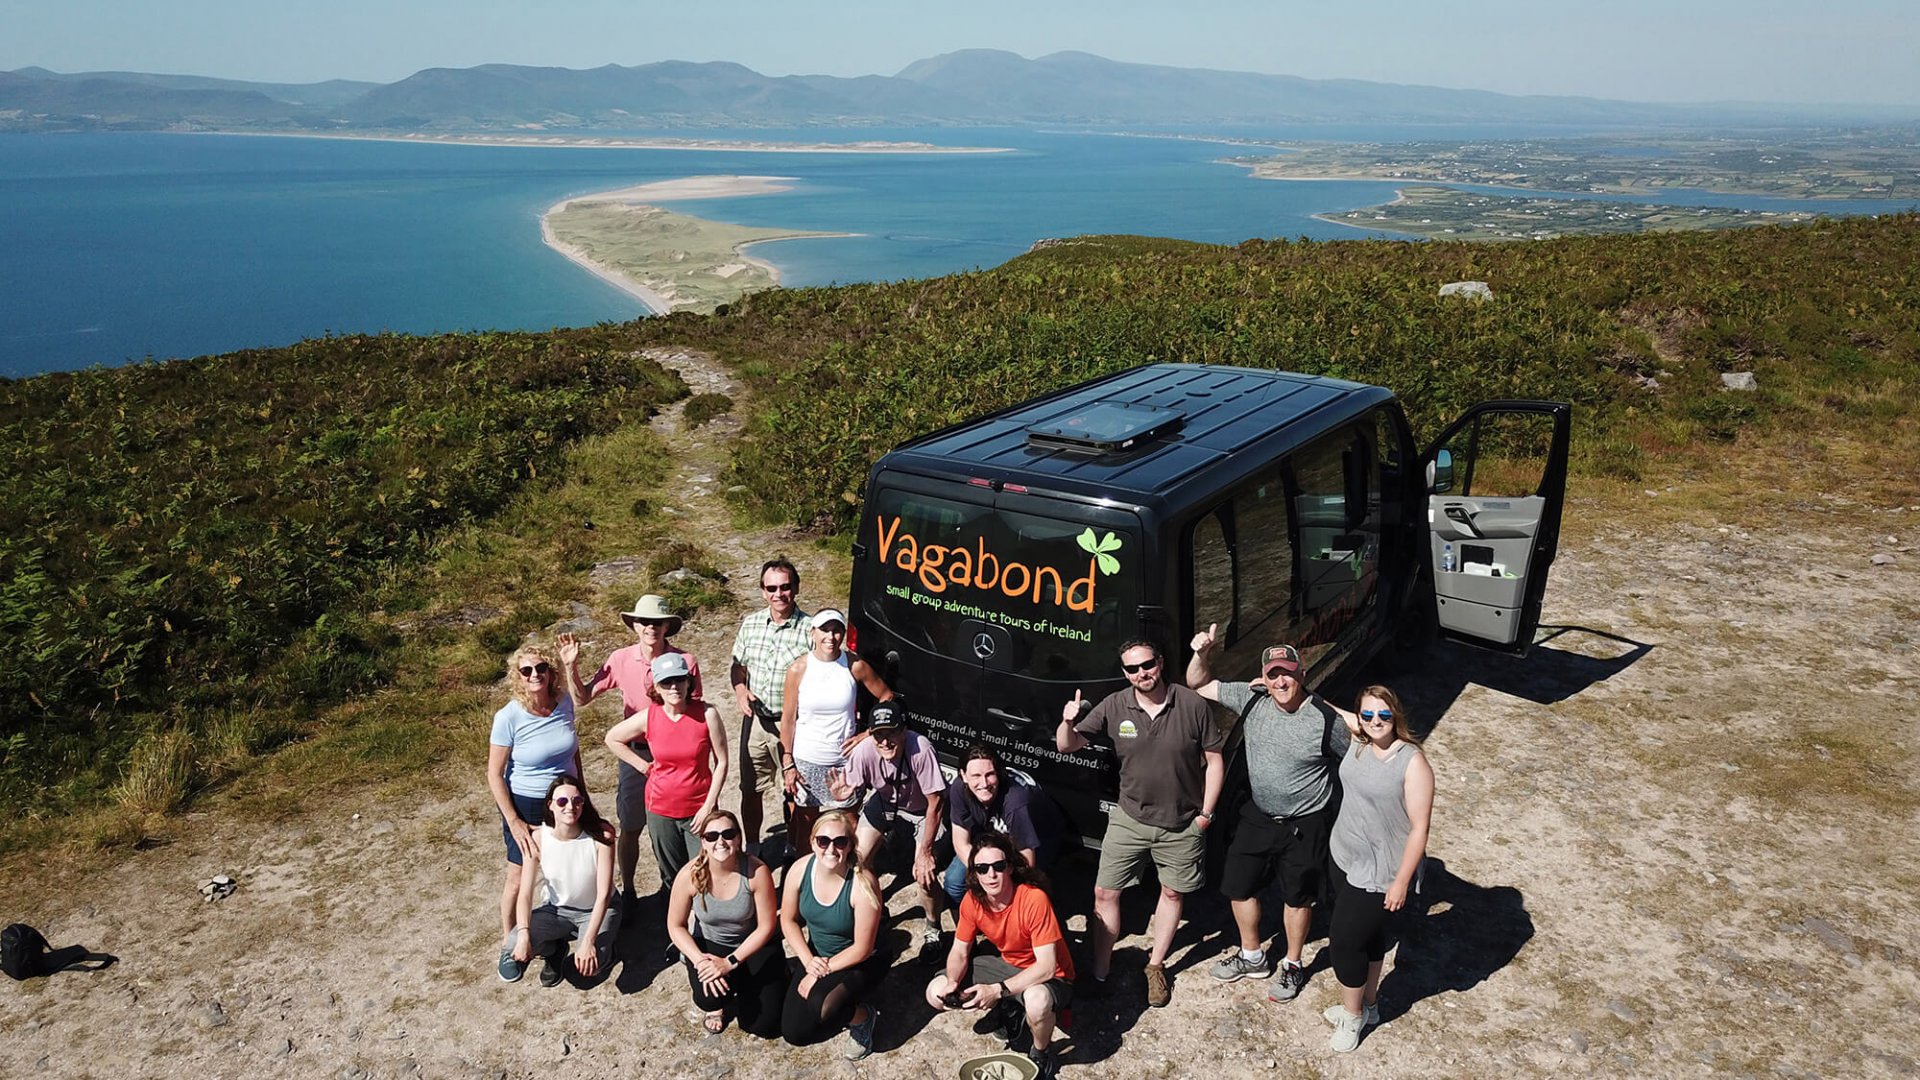 A Vagabond group posing in front of their Vagatron looking over Rossbeigh beach on the Iveragh peninsula